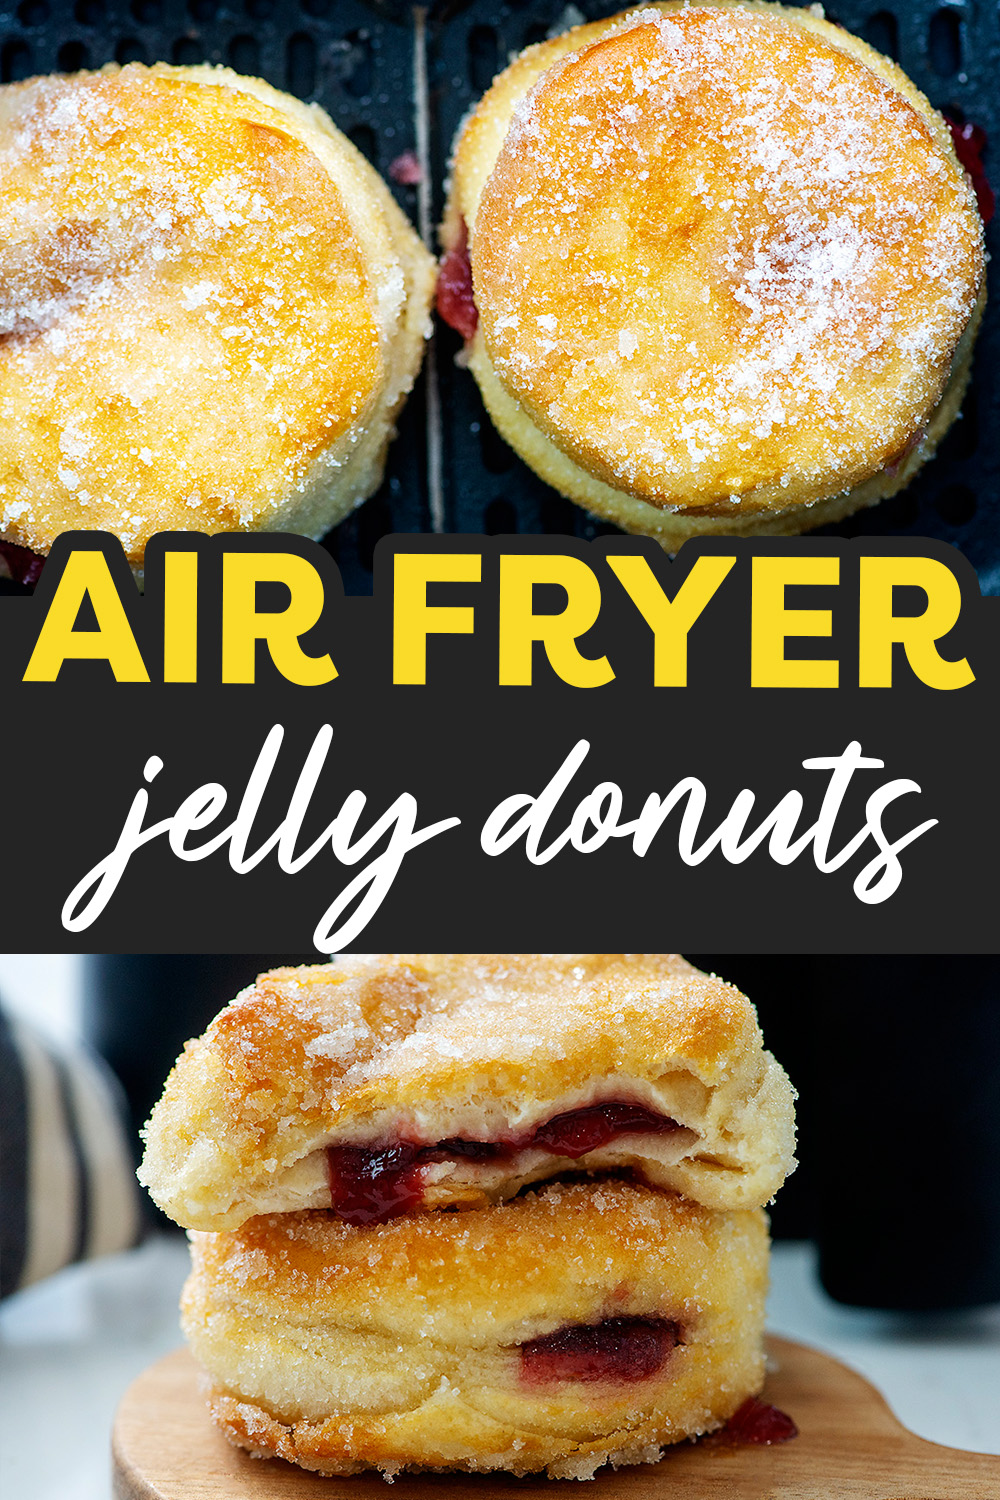 These homemade air fryer jelly donuts are super simple to make!  The air fried biscuit base is amazing and the warm jelly center goes perfect with this donut!